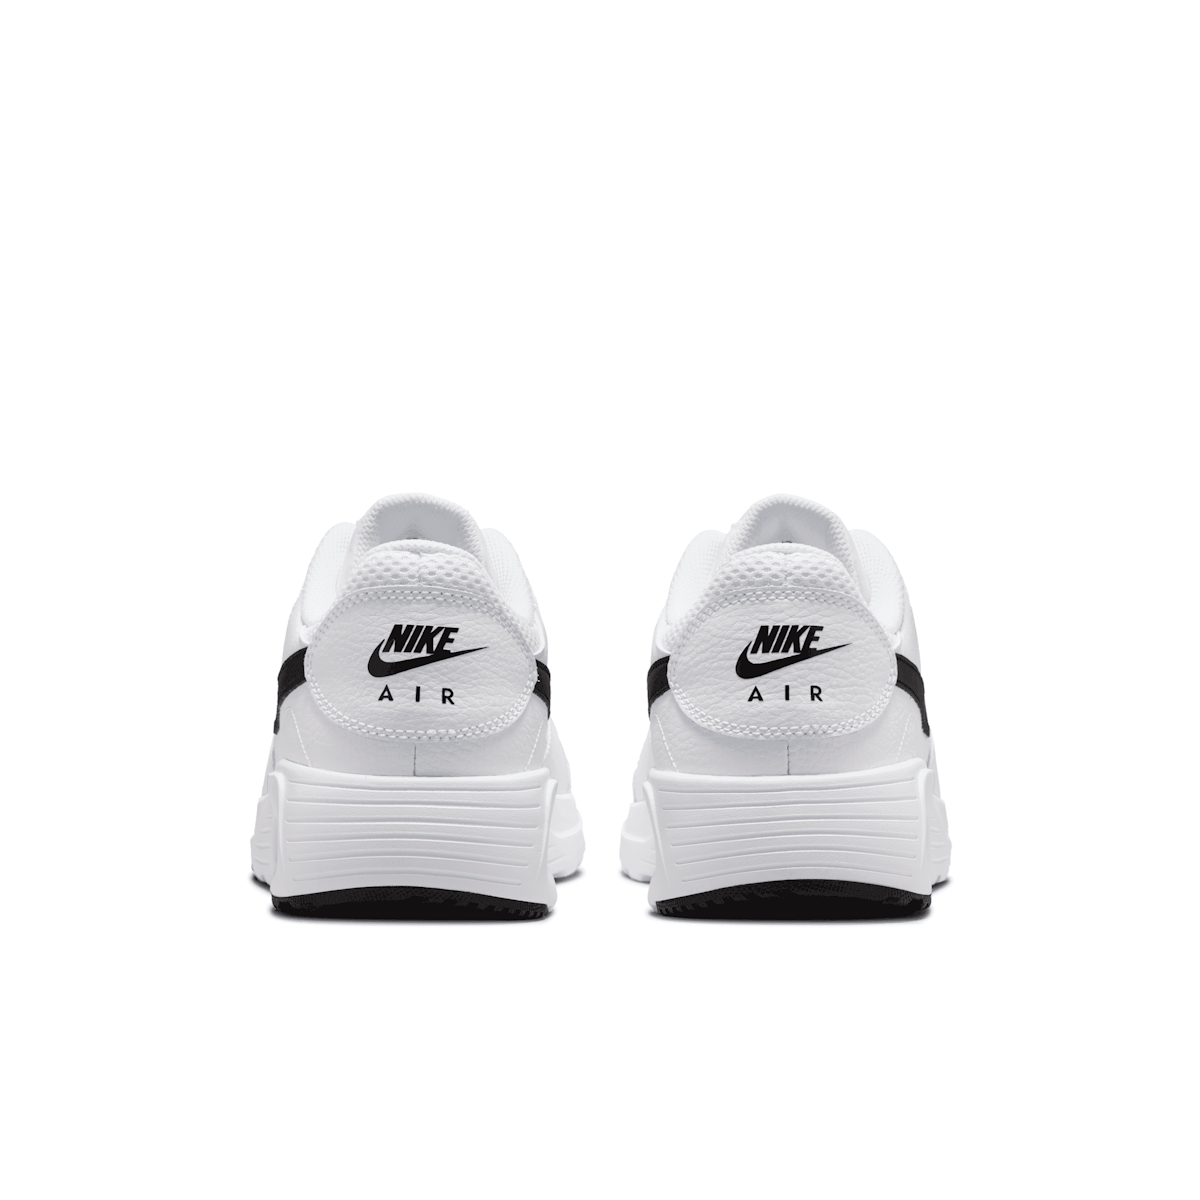 Nike Air Max SC Release White Black and Date CW4555-102 - Raffles